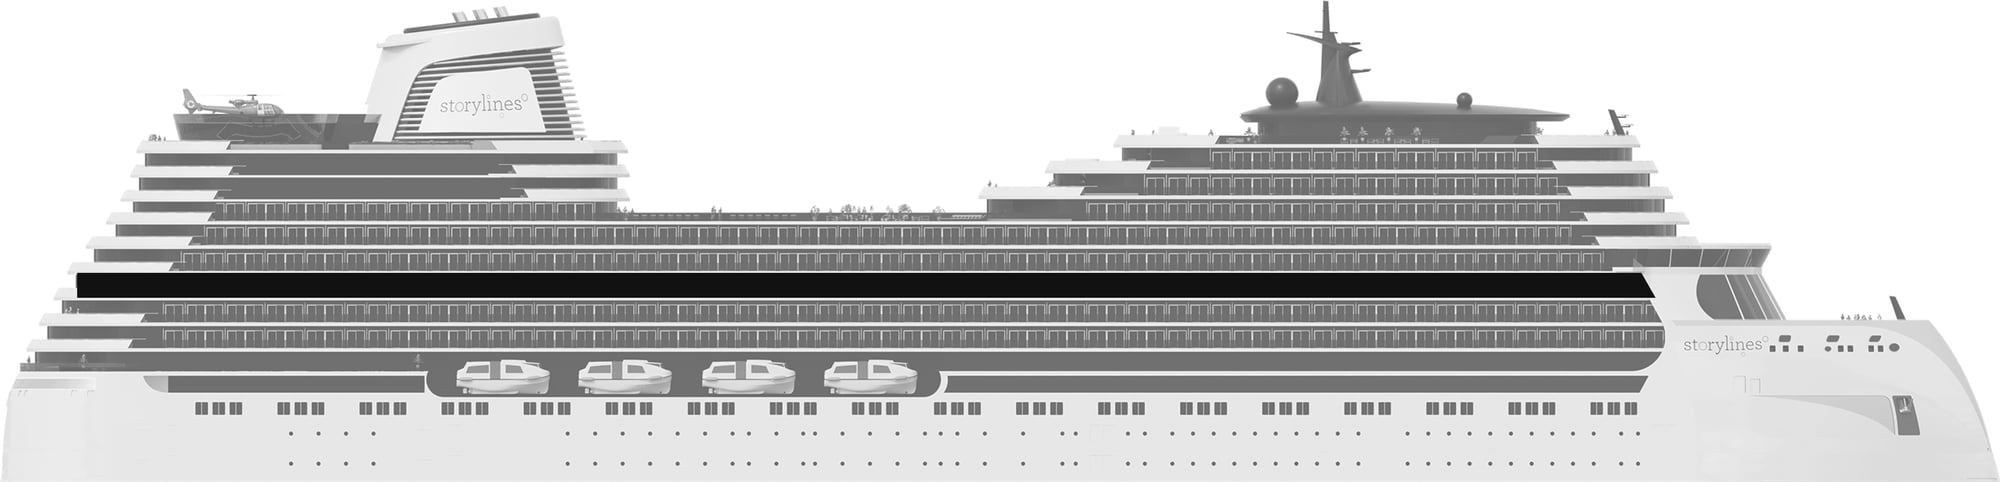 Profile shot of Storylines residential ship showing the location of Deck 11